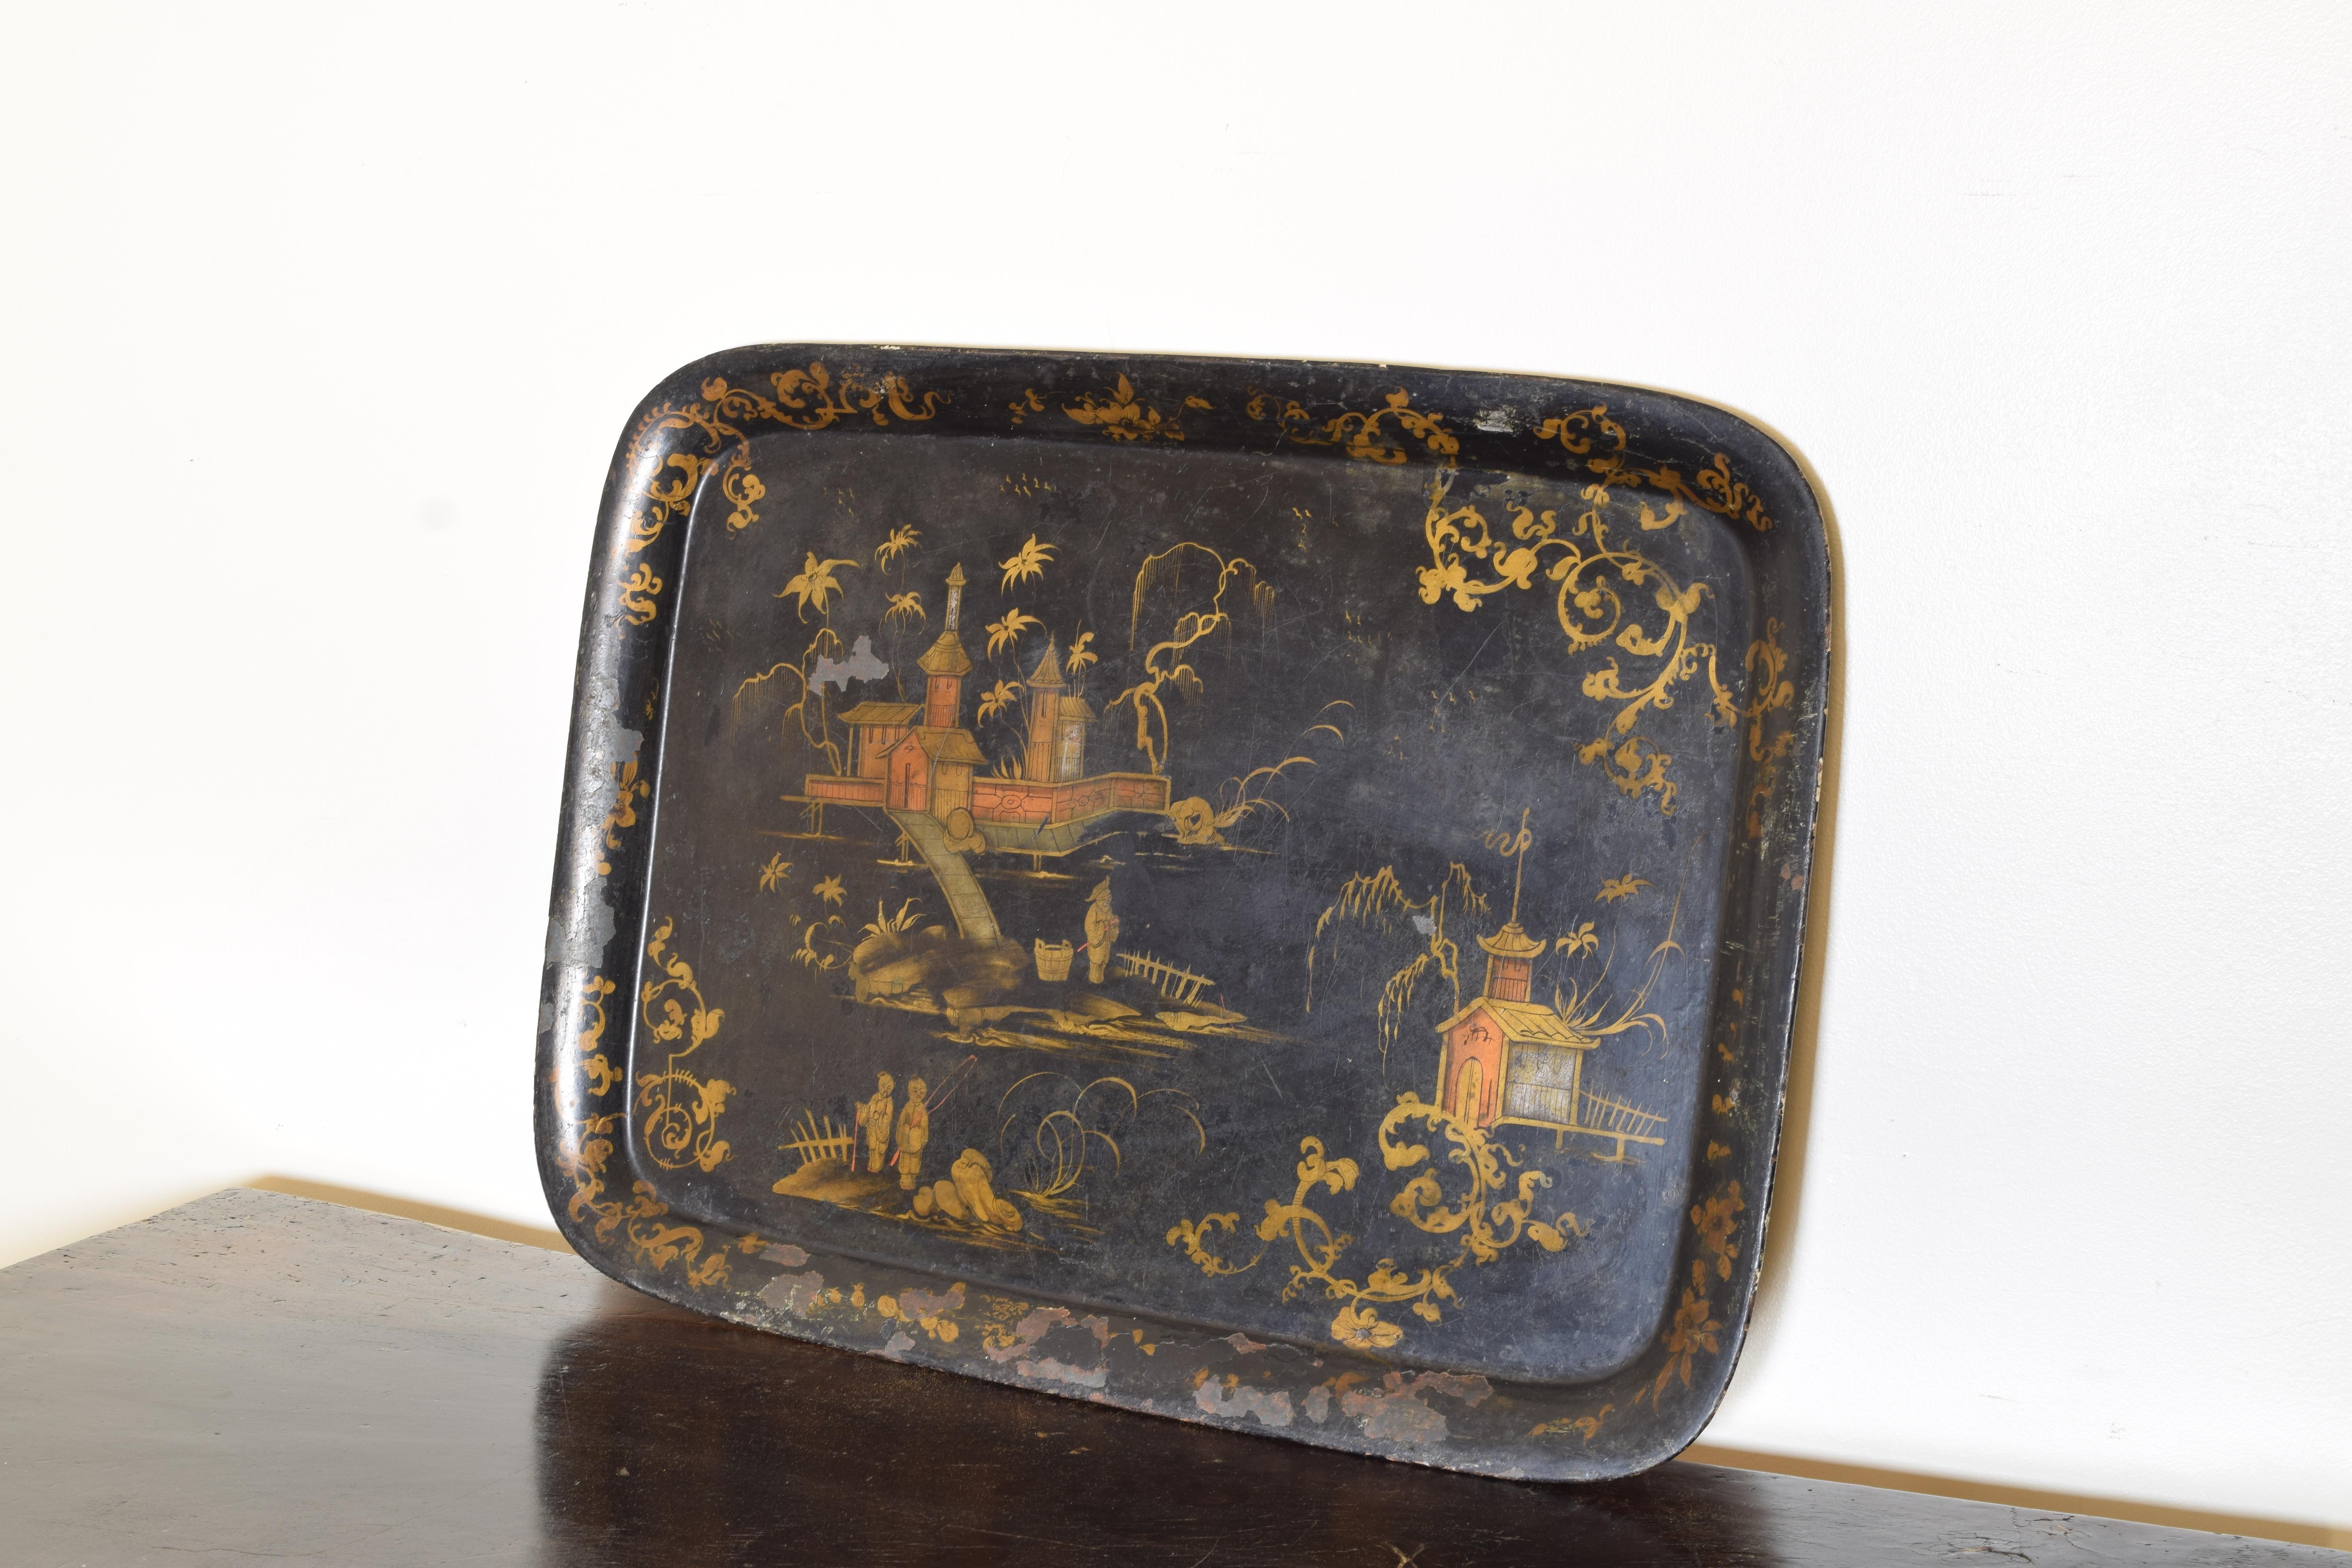 Of rectangular form with rounded corners and a raised edge, painted with chinoiserie decoration